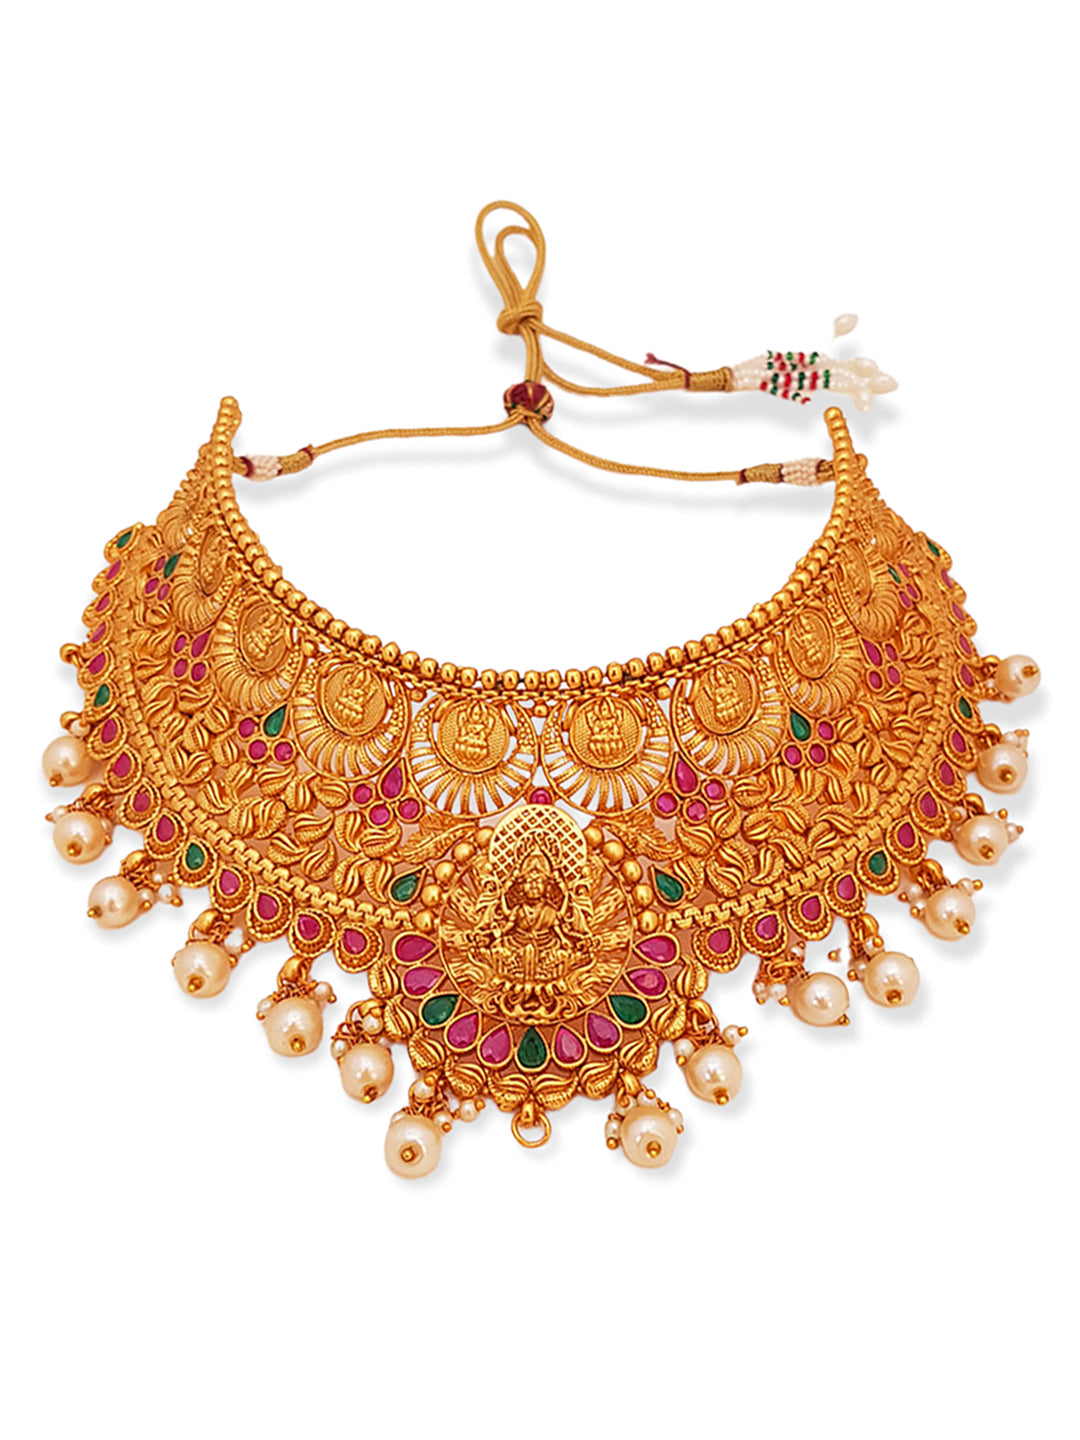 Gold Plated Premium Lakshmi bahubali motif Heavy Choker for special occasions Free express Delivery NSN07-1664-1066N